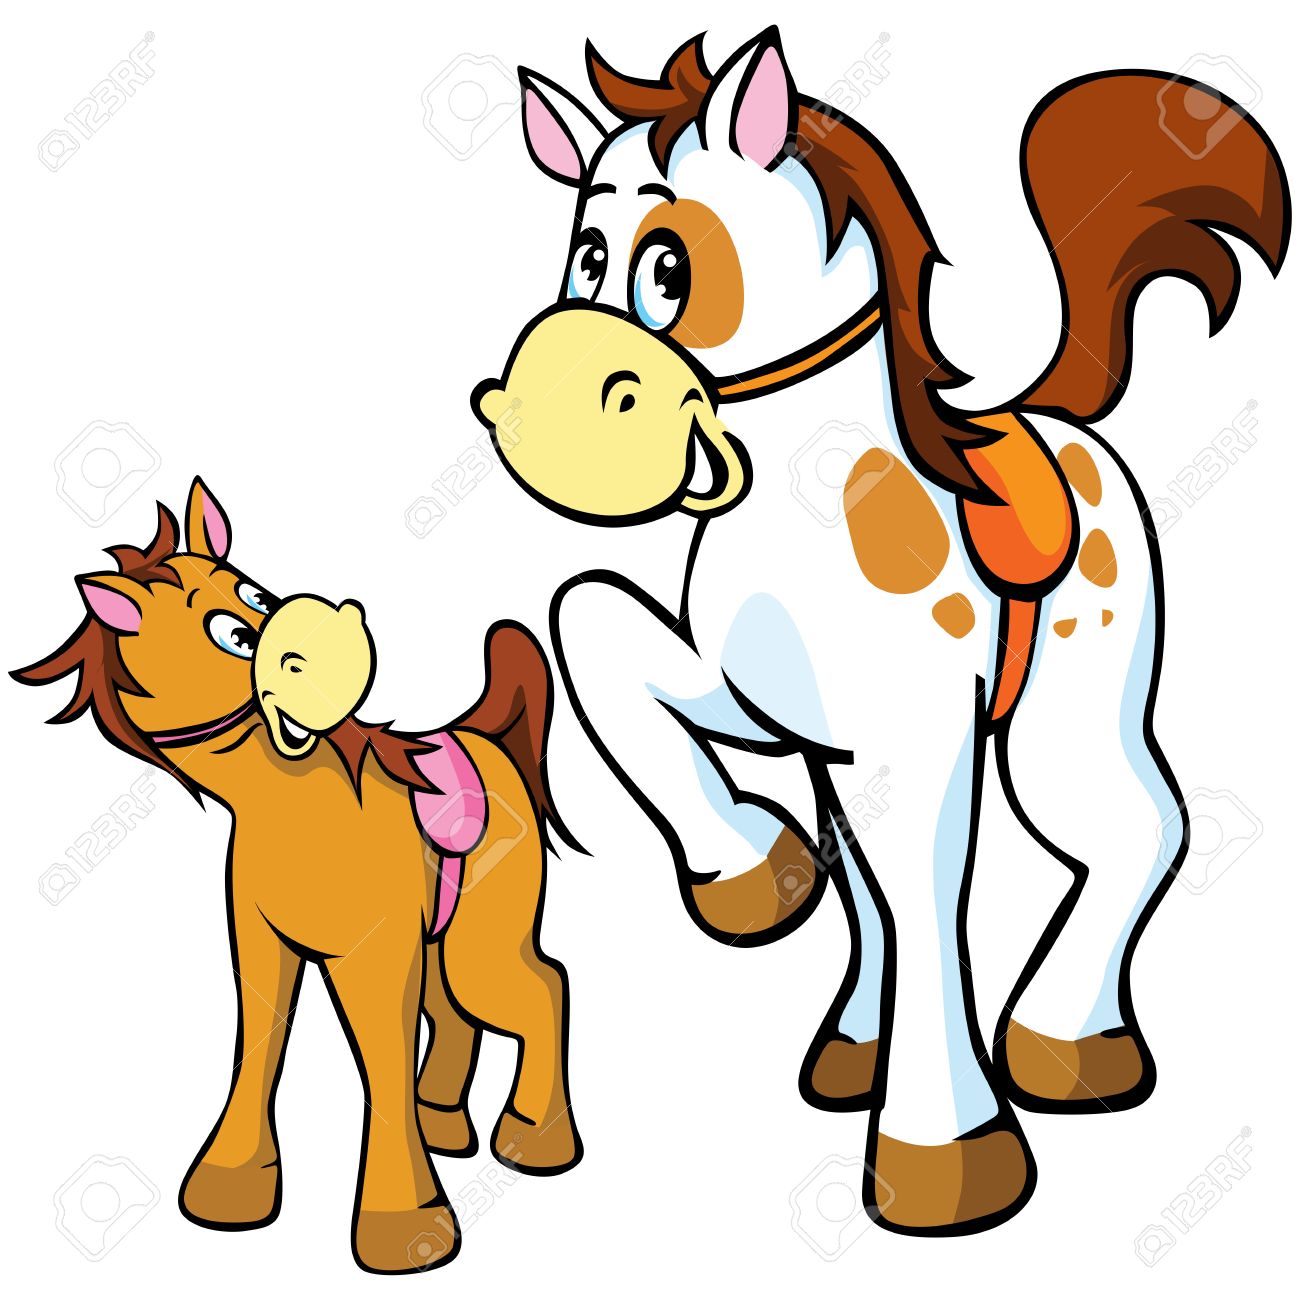 Collection of Foal clipart.